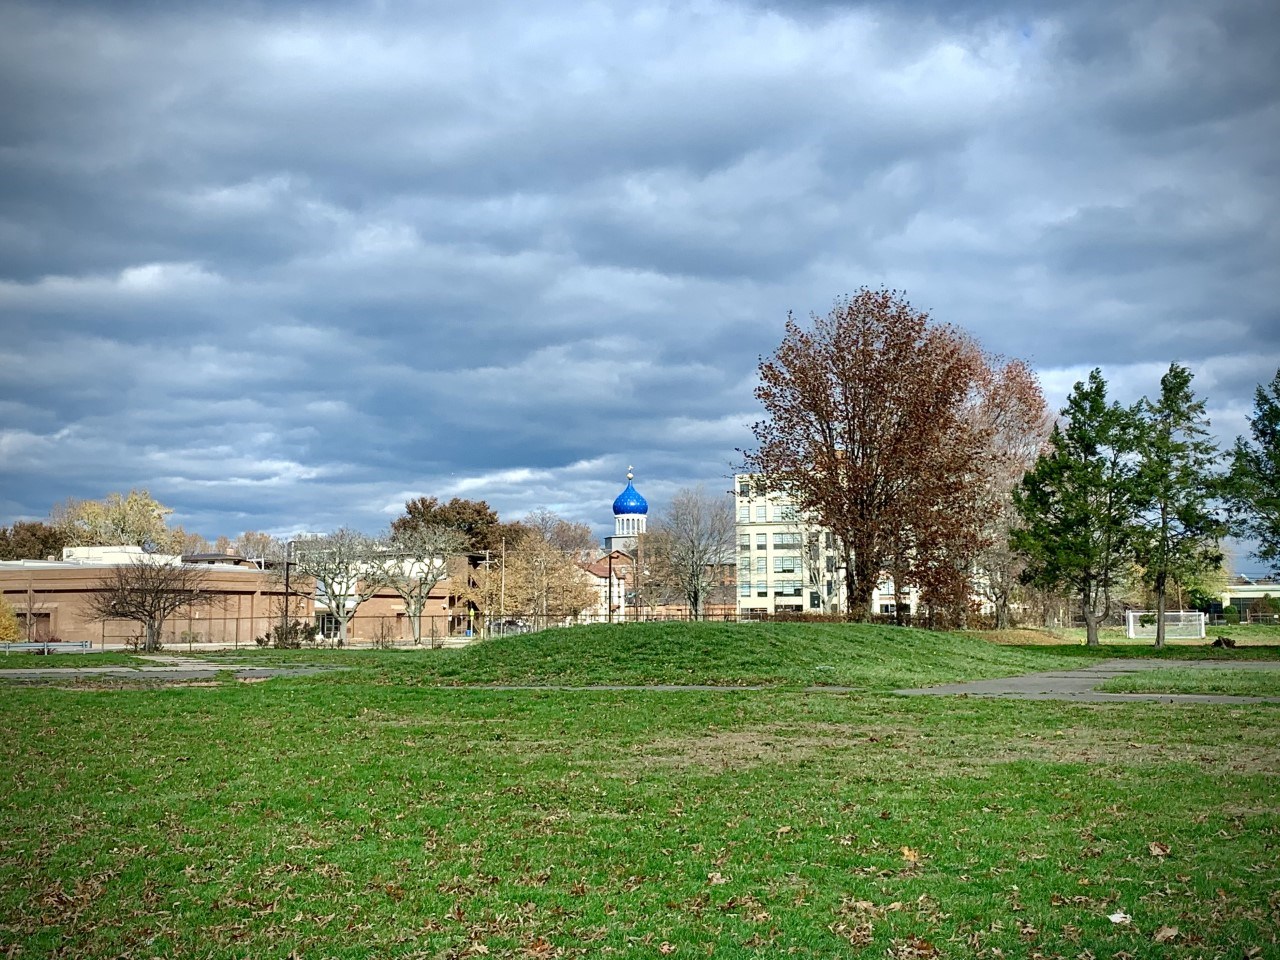 A group of buildings seen from a park, with the blue Colt dome in the center.